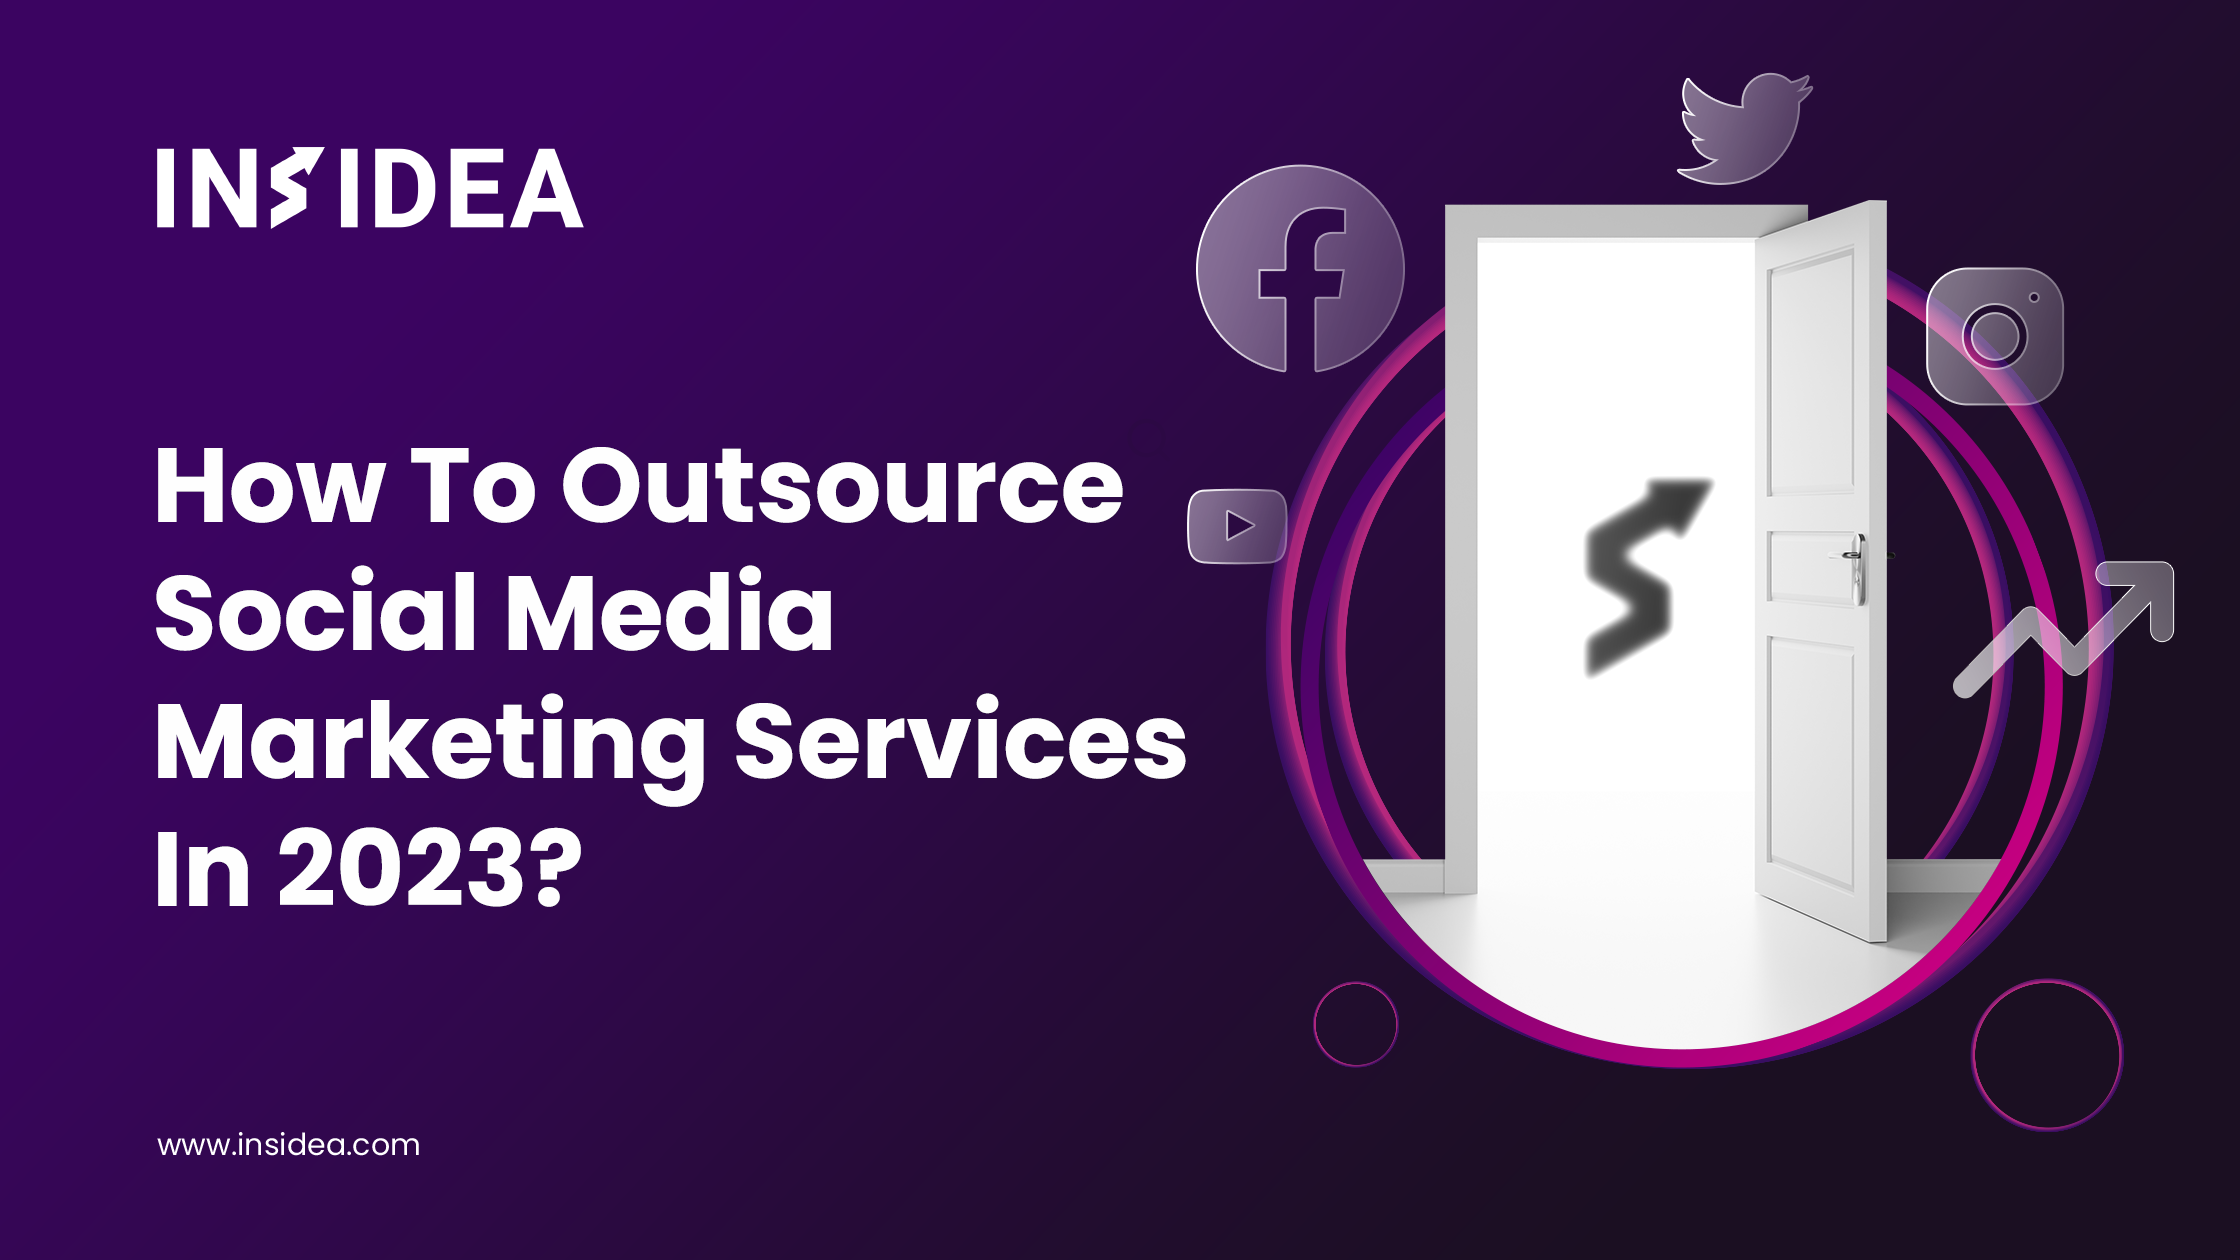 How To Outsource Social Media Marketing Services In 2023?